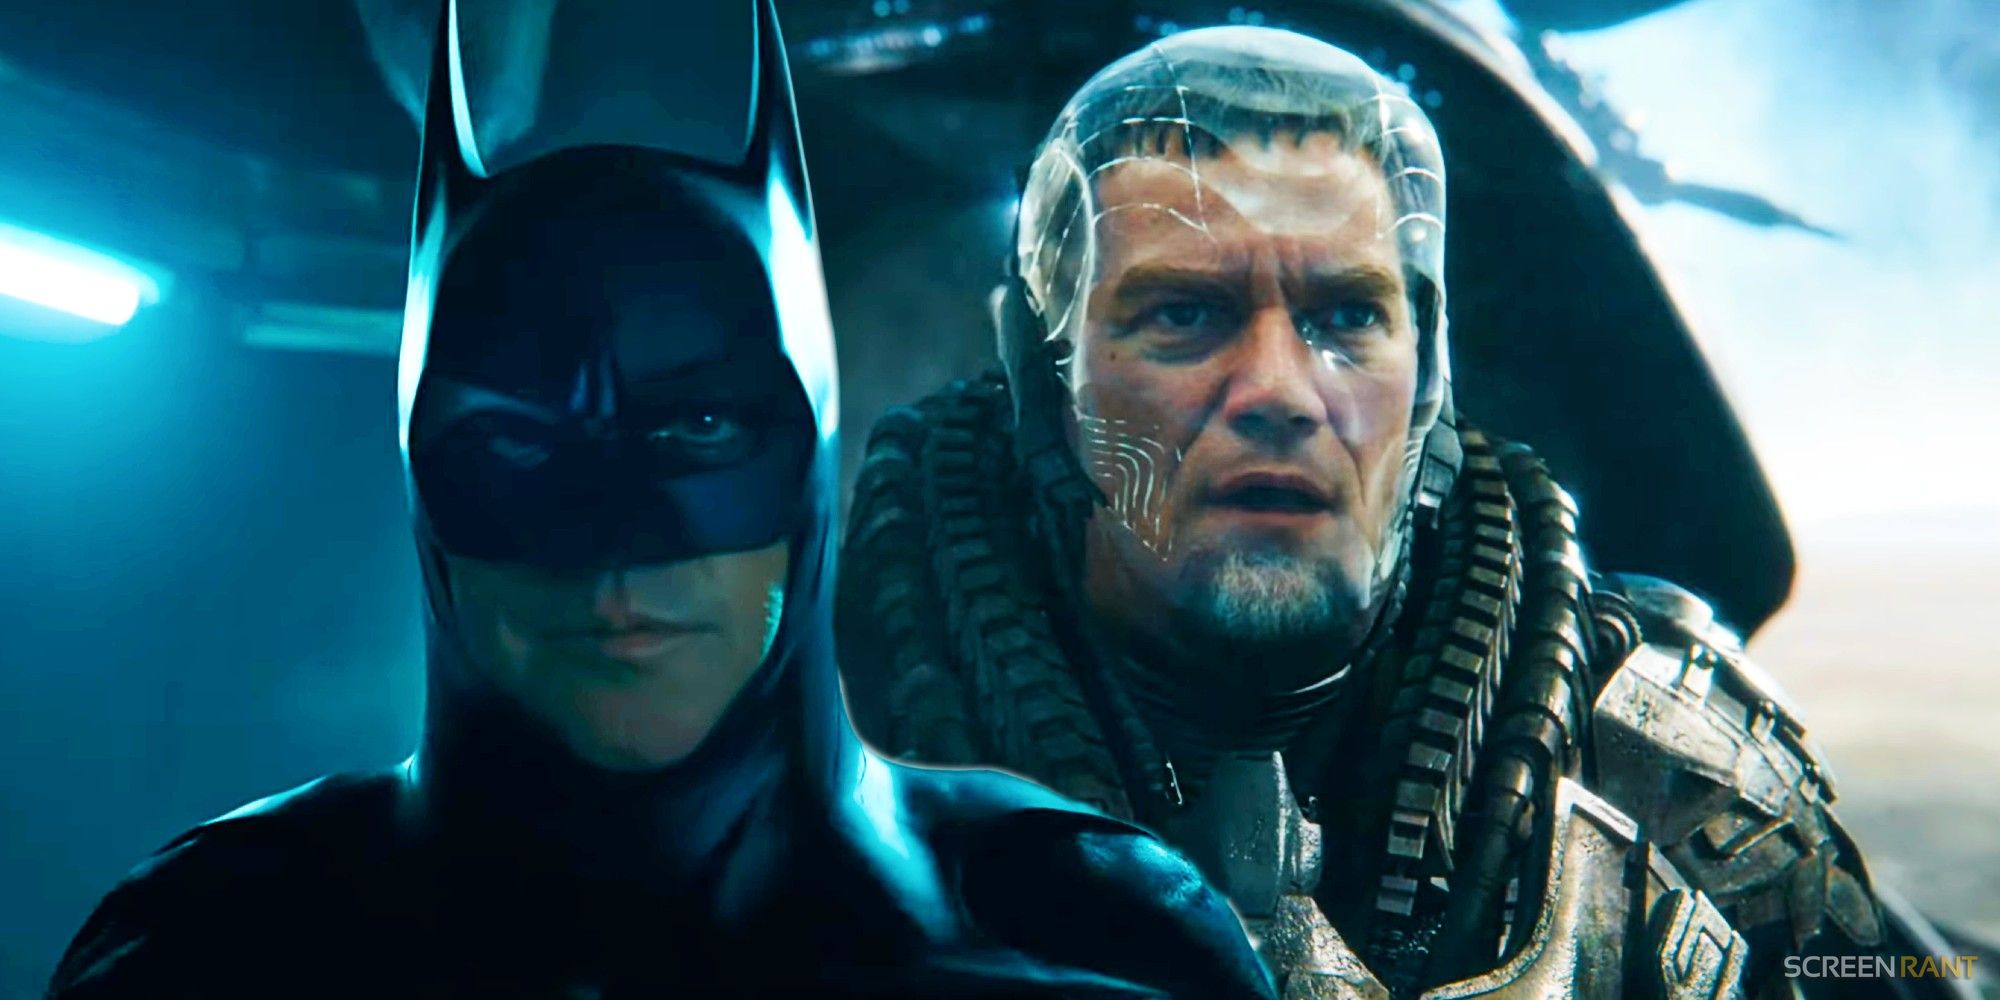 Michael Keaton as Batman and Michael Shannon as Zod in The Flash movie